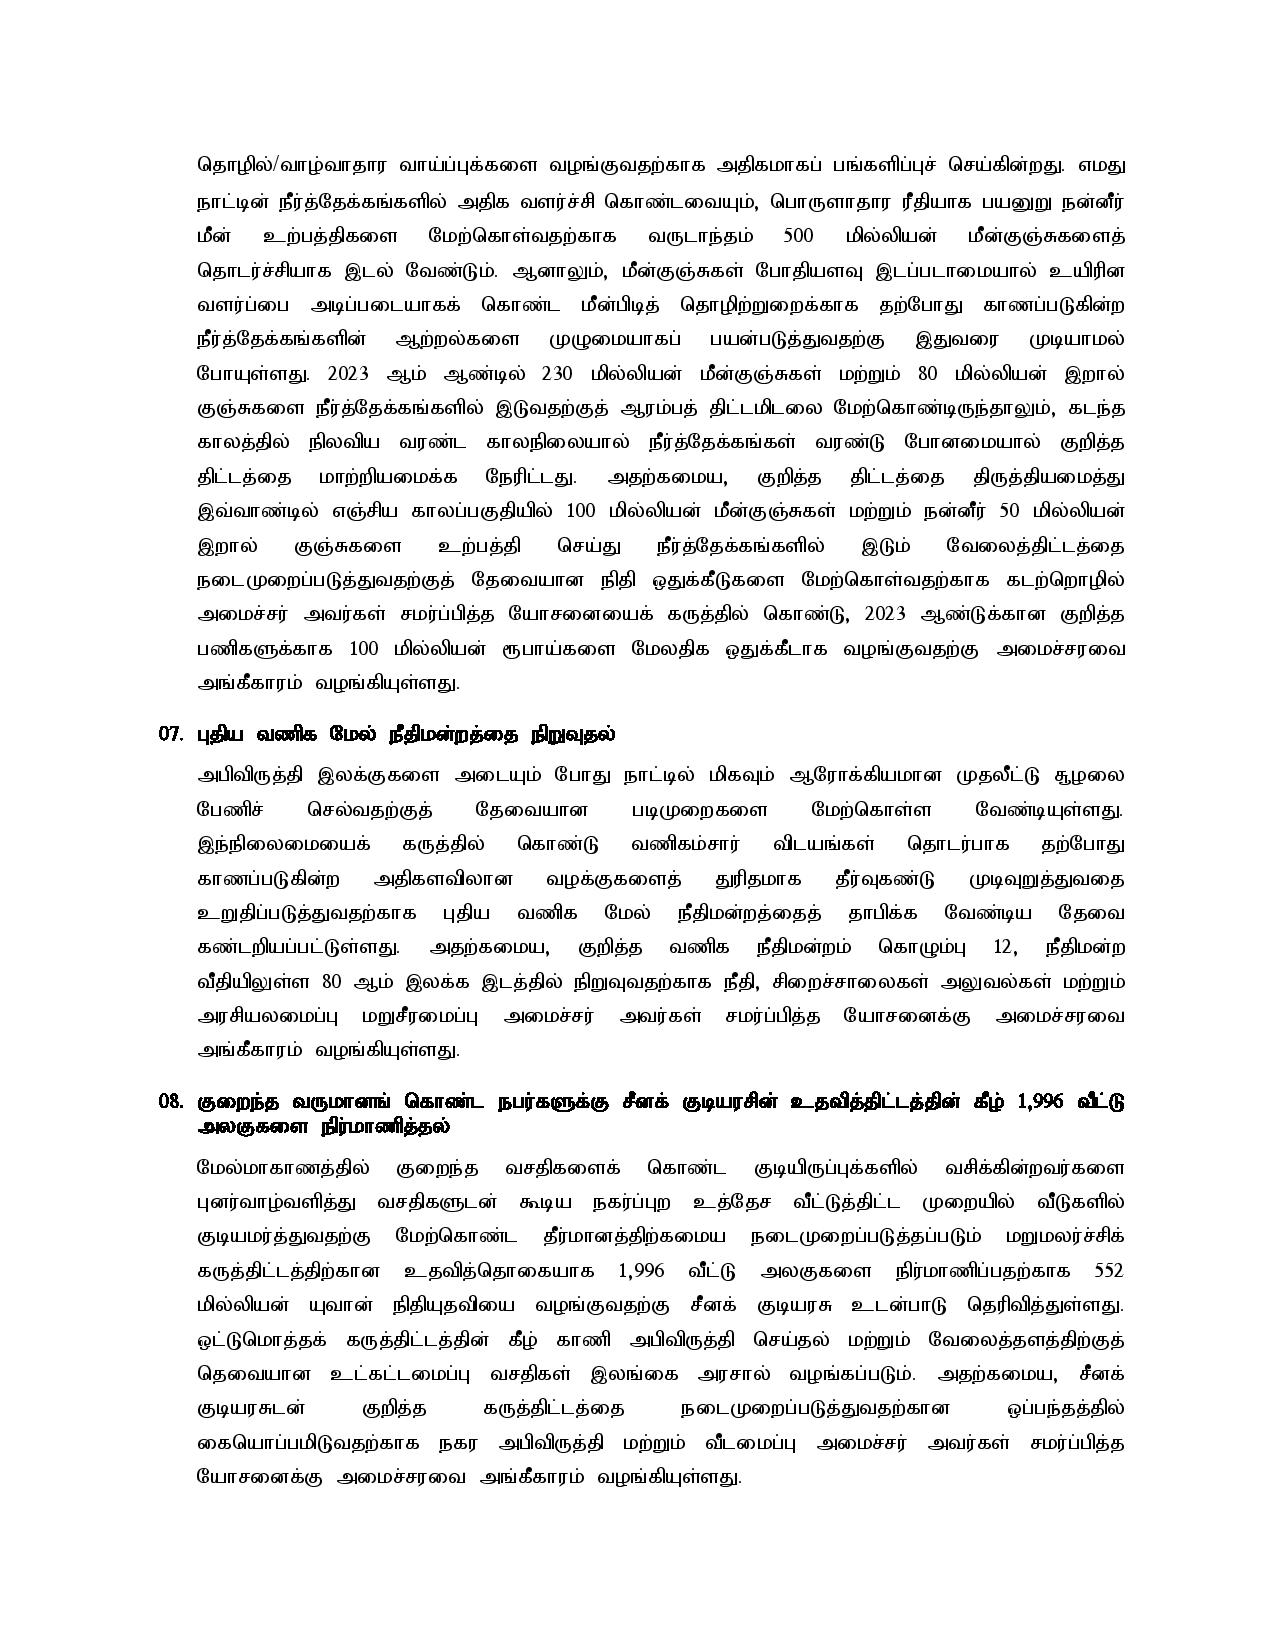 Cabinet Decisions on 02.10.2023 Tamil page 003